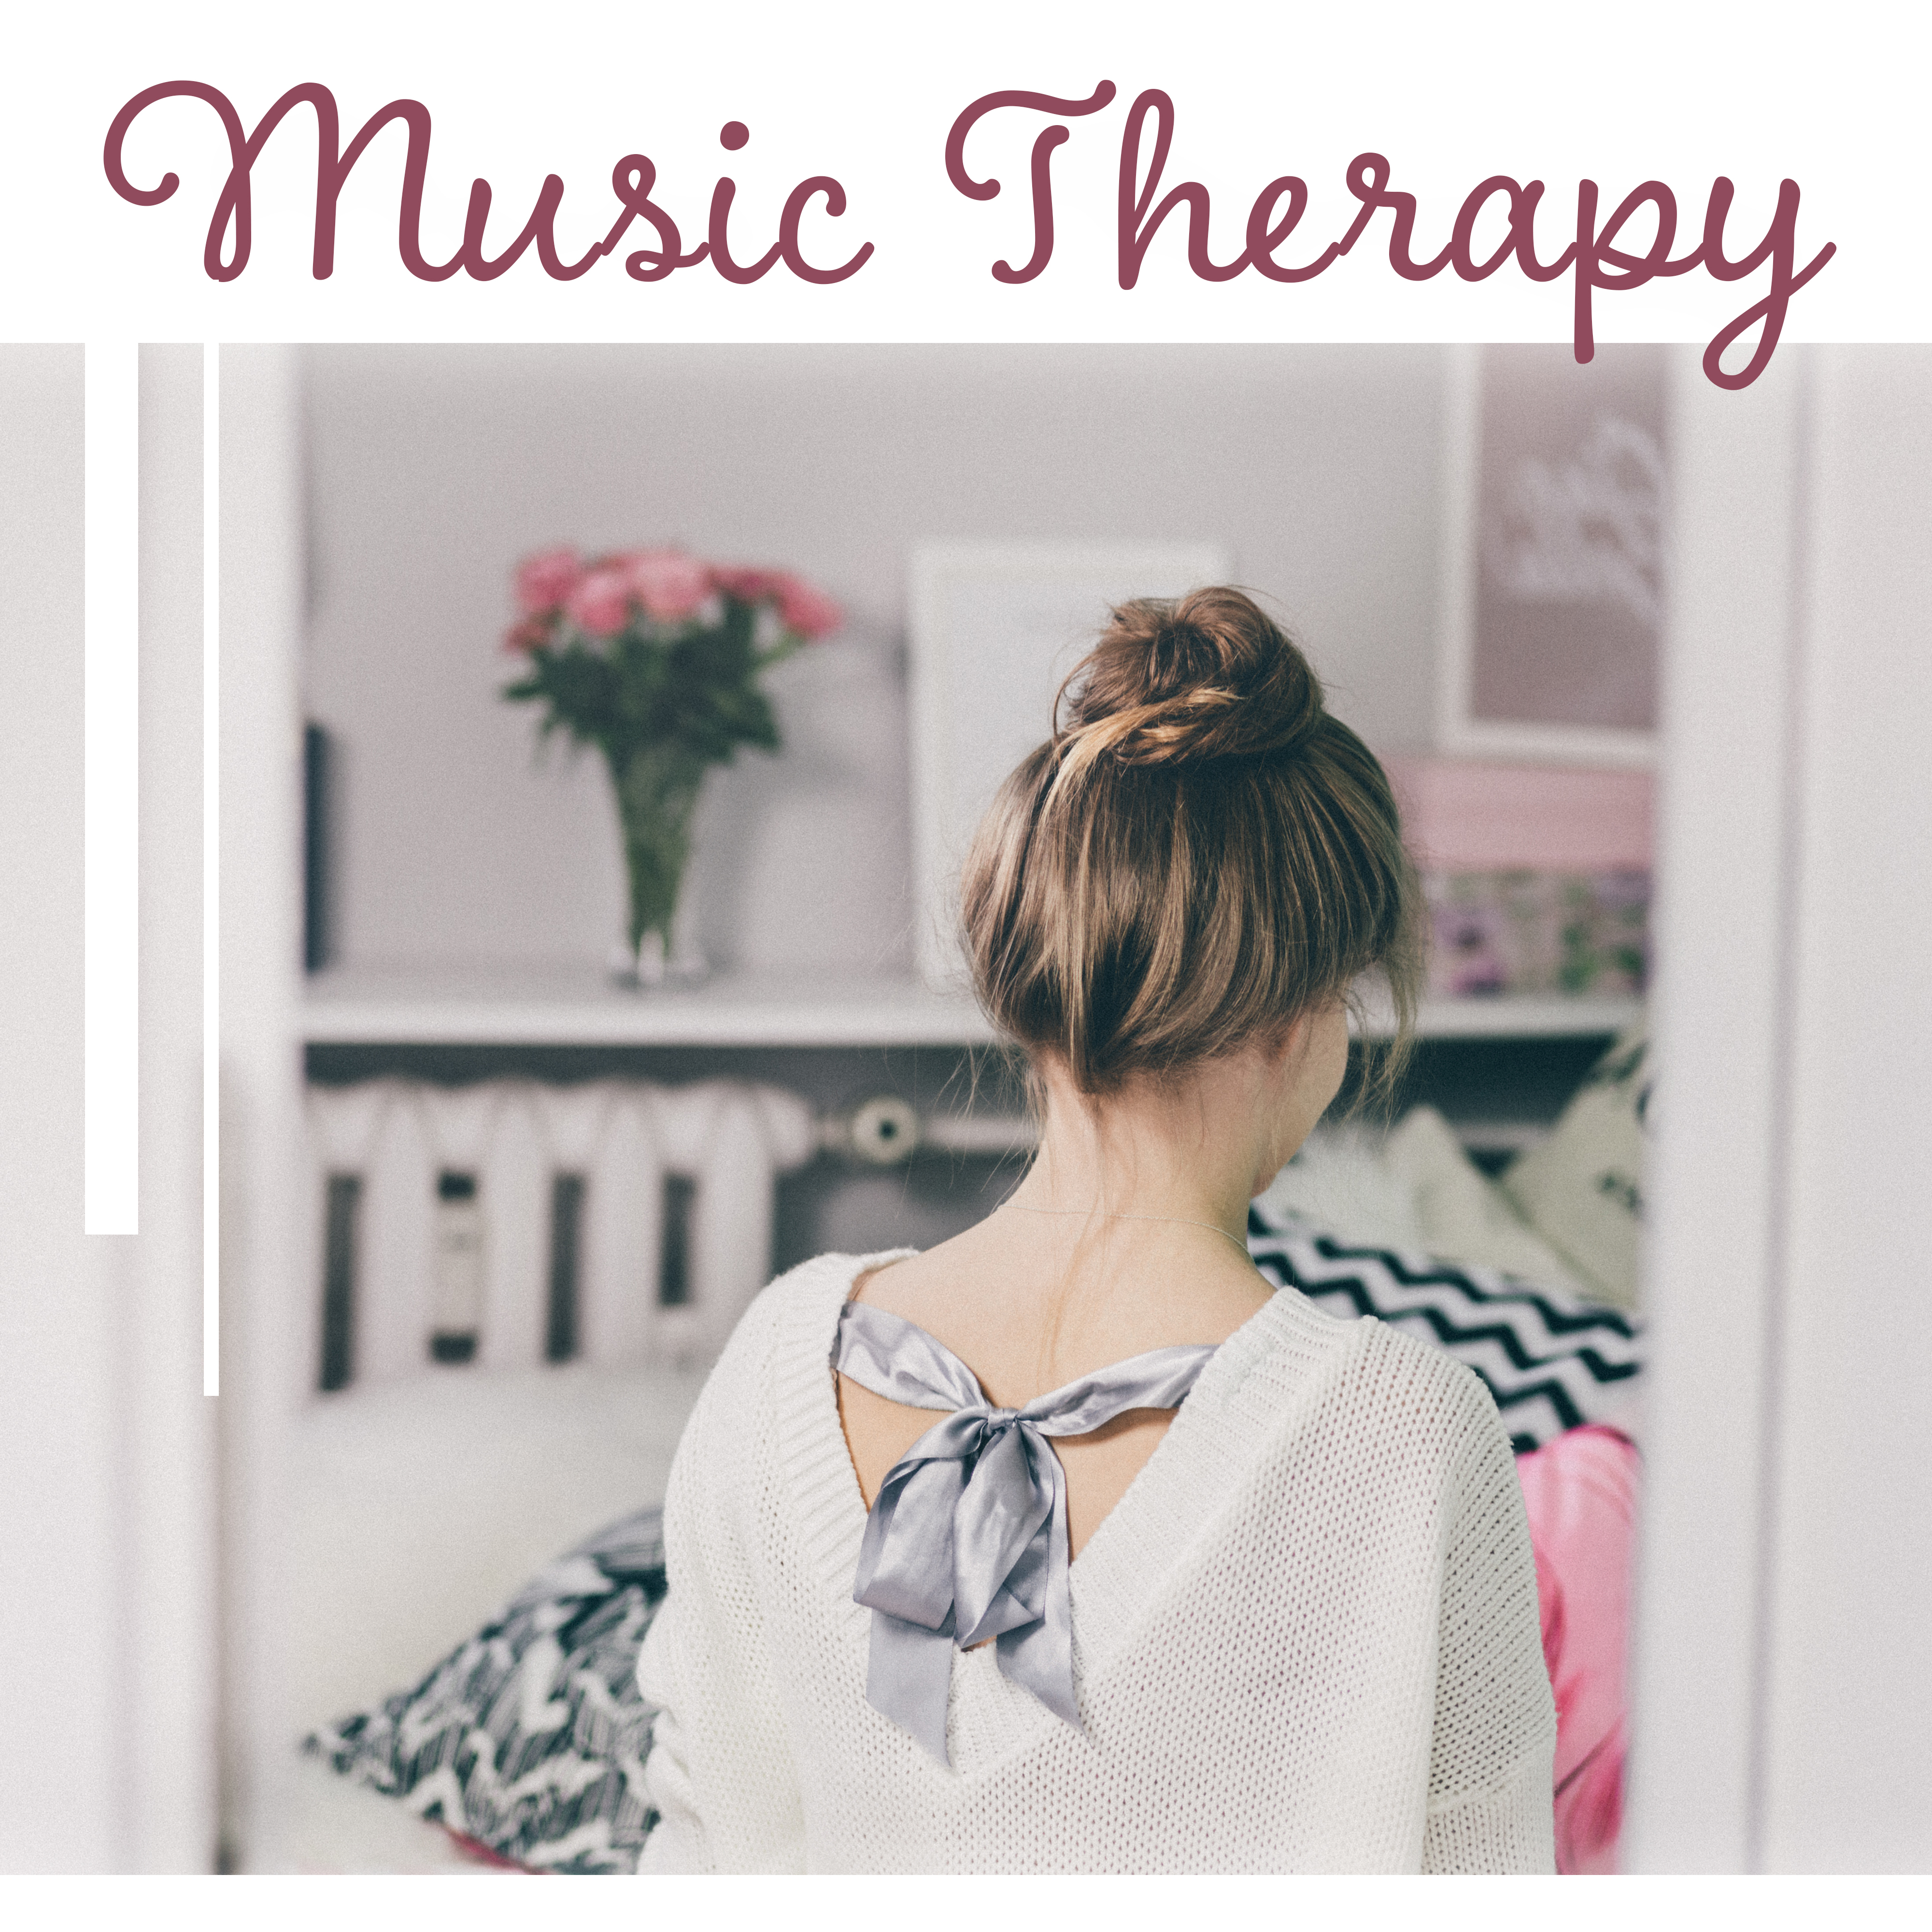 Music Therapy – New Age Sounds for Relaxation, Stress Relief, Peaceful Mind, Inner Calmness, Music Reduces Stress, Zen Music